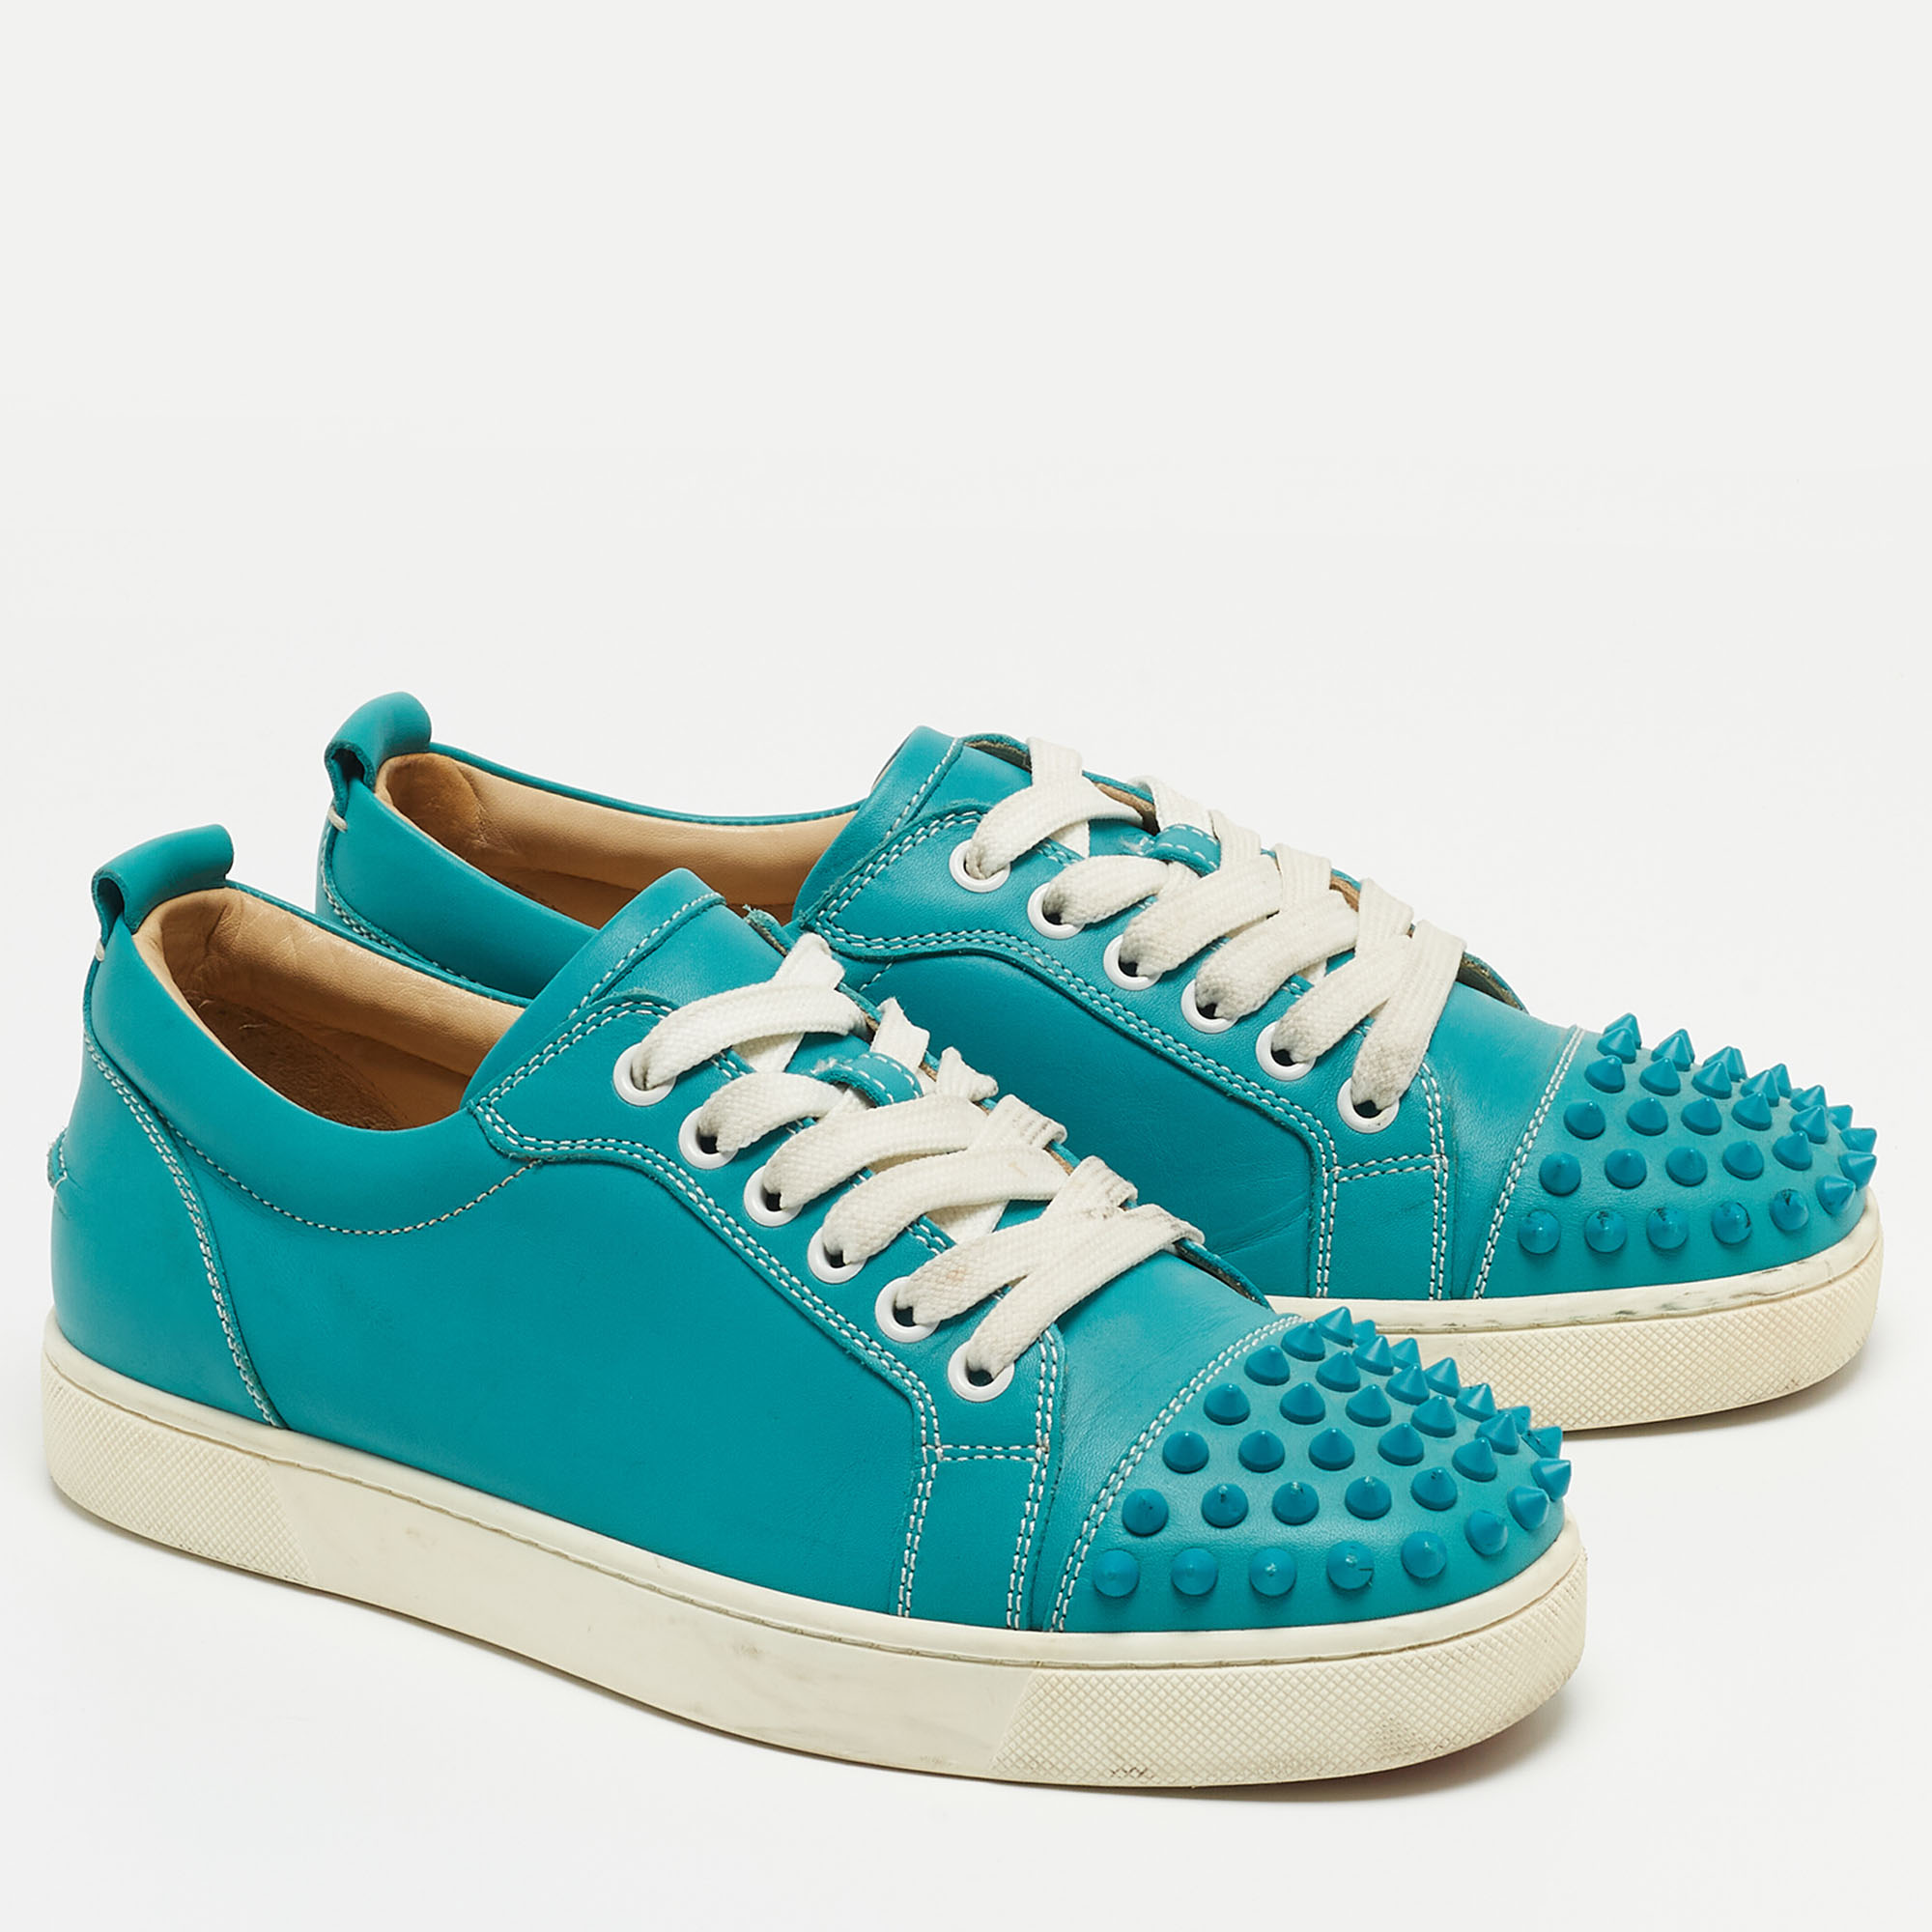 Christian Louboutin Turquoise Leather Louis Junior Spikes Sneakers Size 38